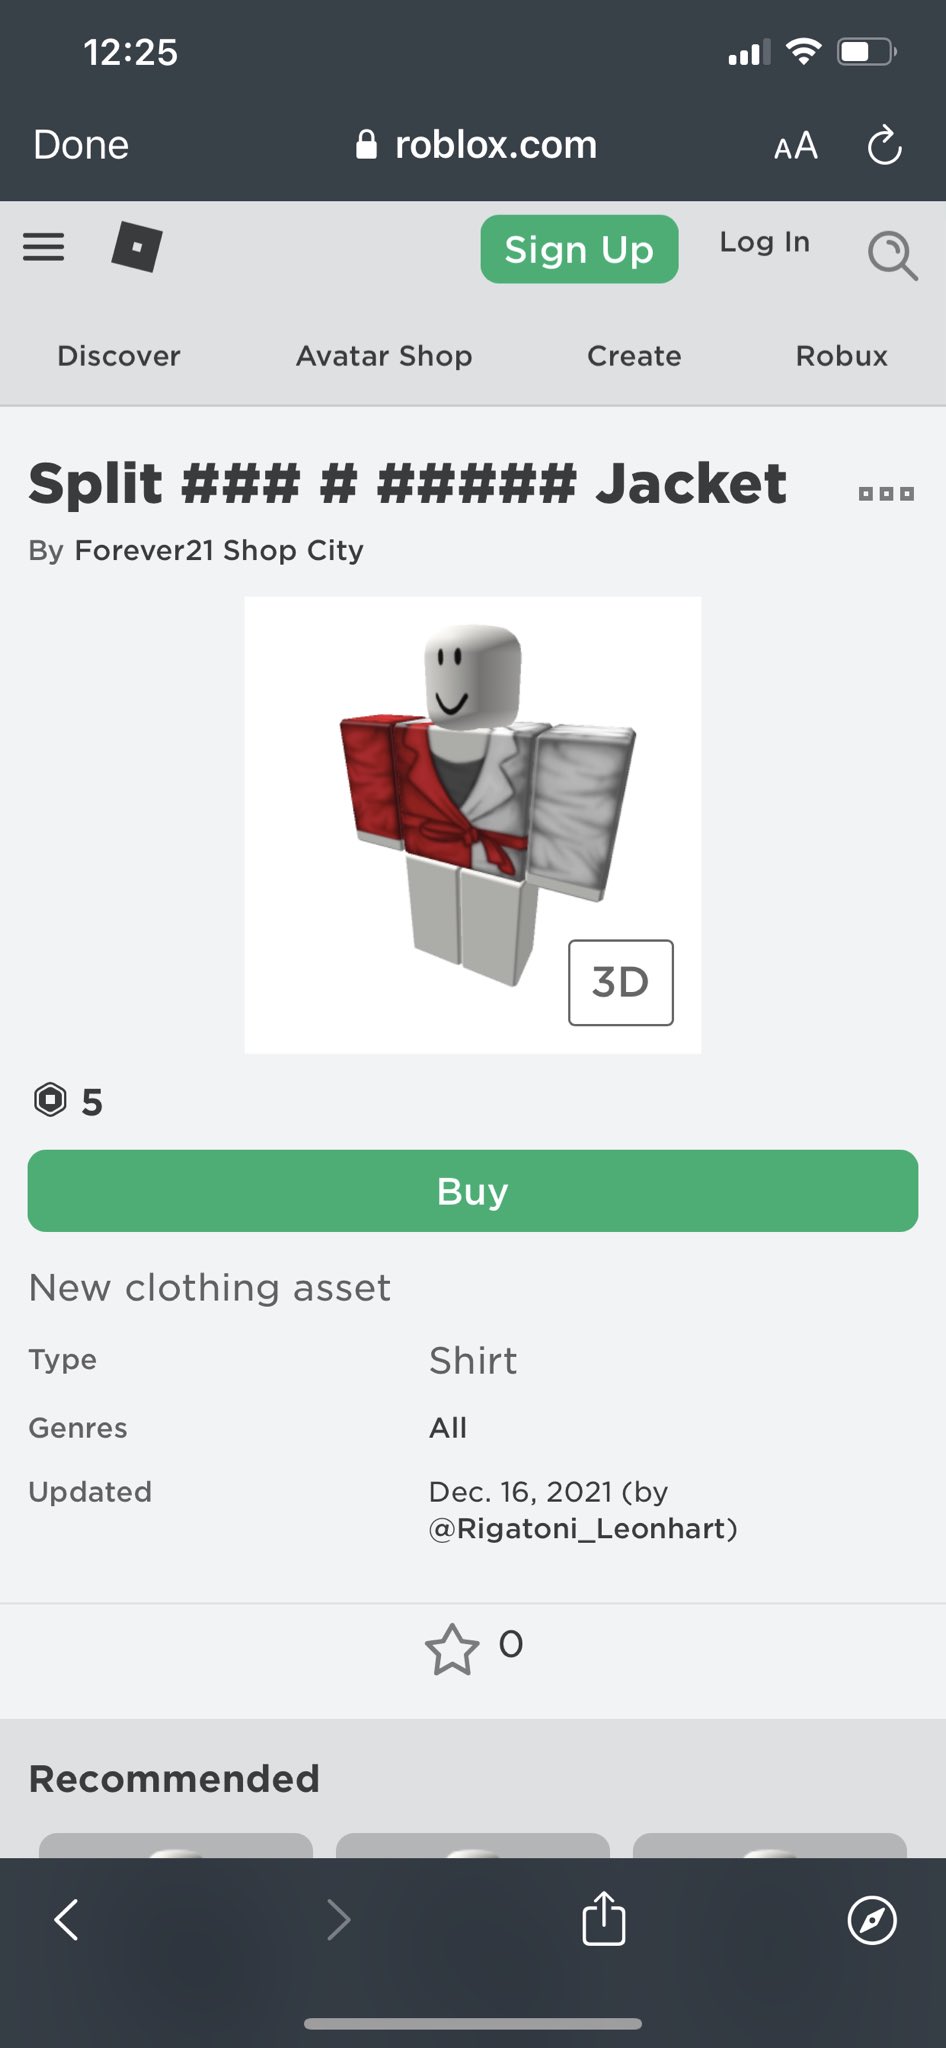 How To GET MULTIPLE ITEMS On Roblox! 